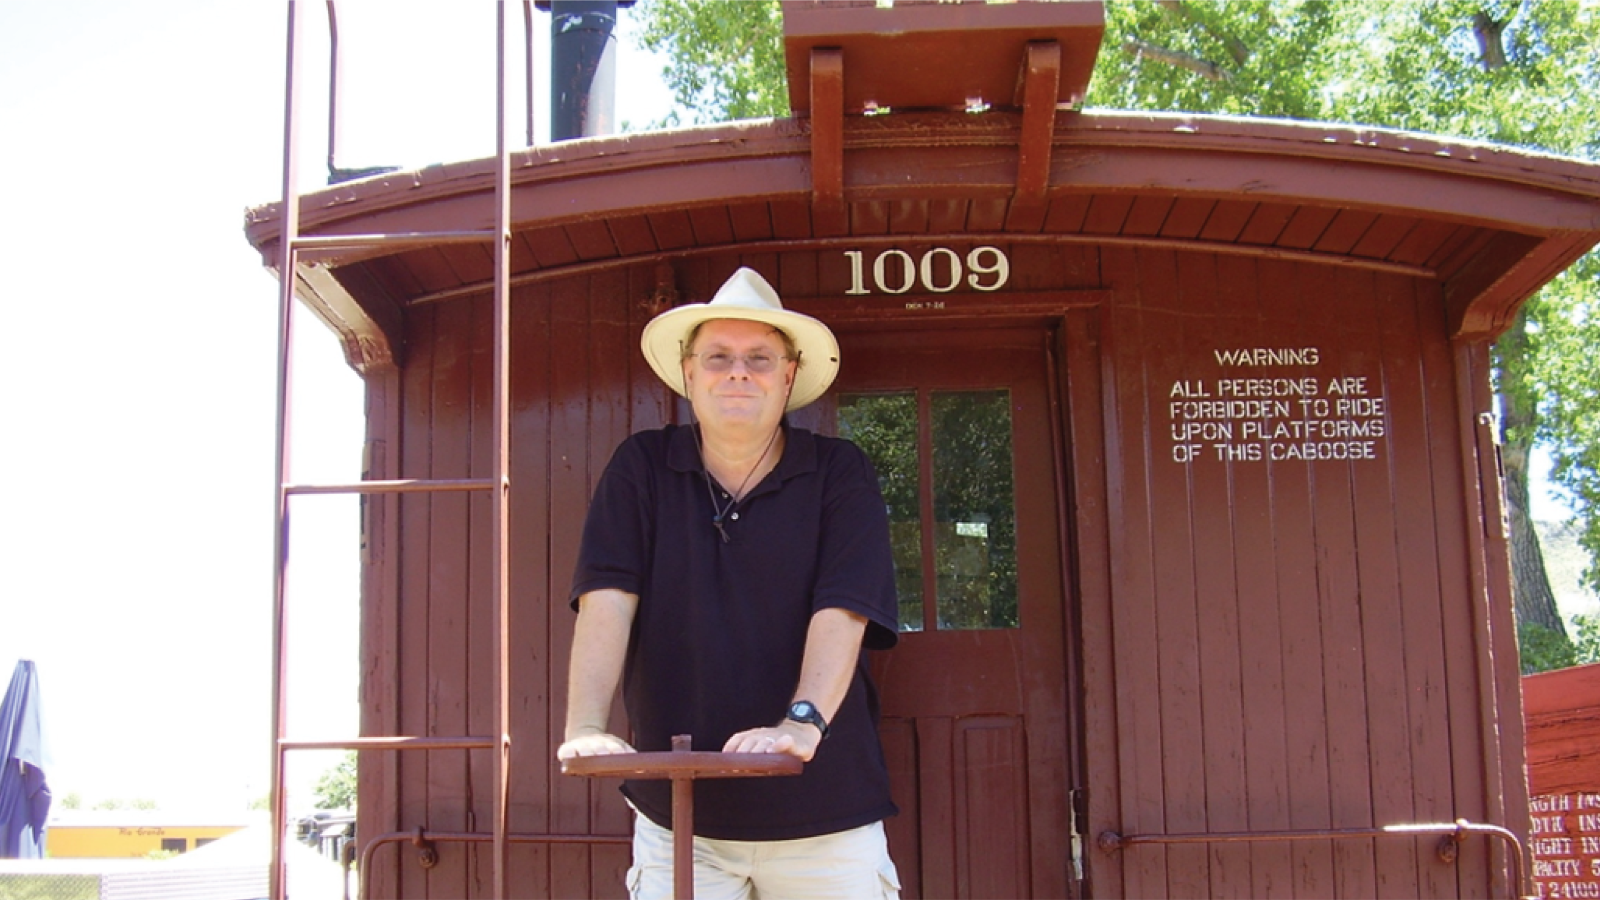 Mark Izold standing on a train car at the train museum in Golden, CO